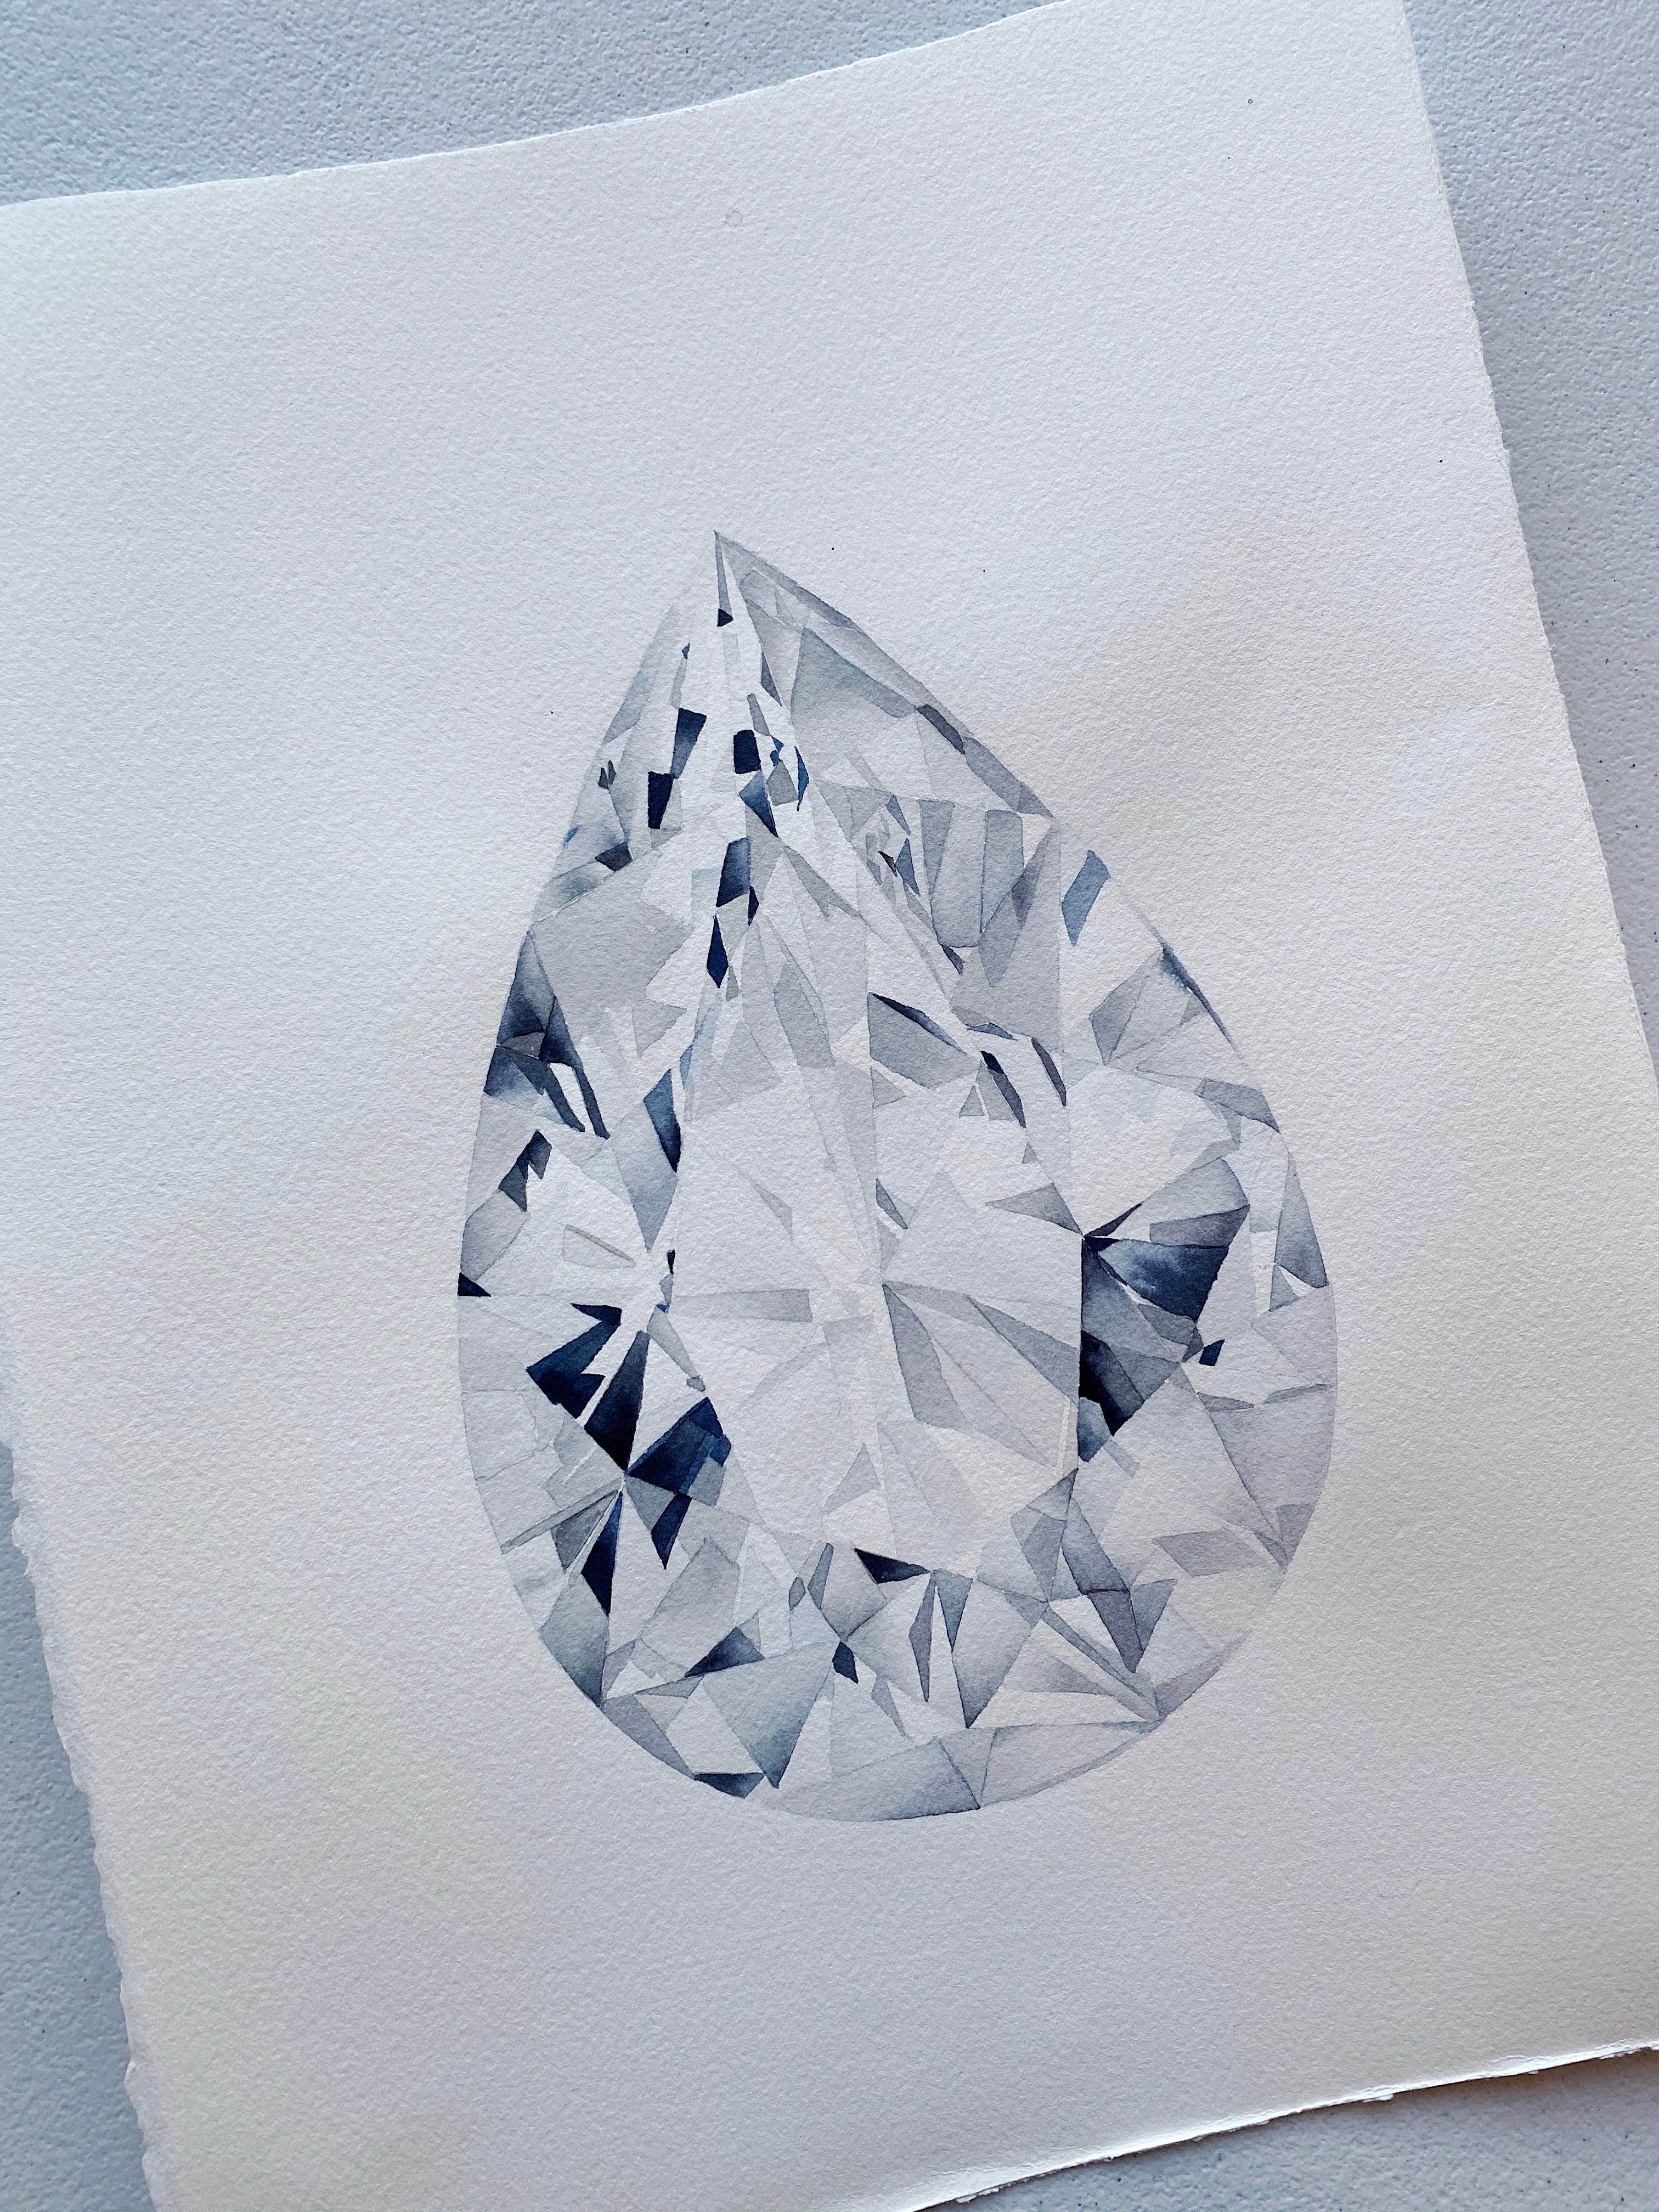 Original Painting - Watercolor Pear Cut Diamond Painting 11x15 inches